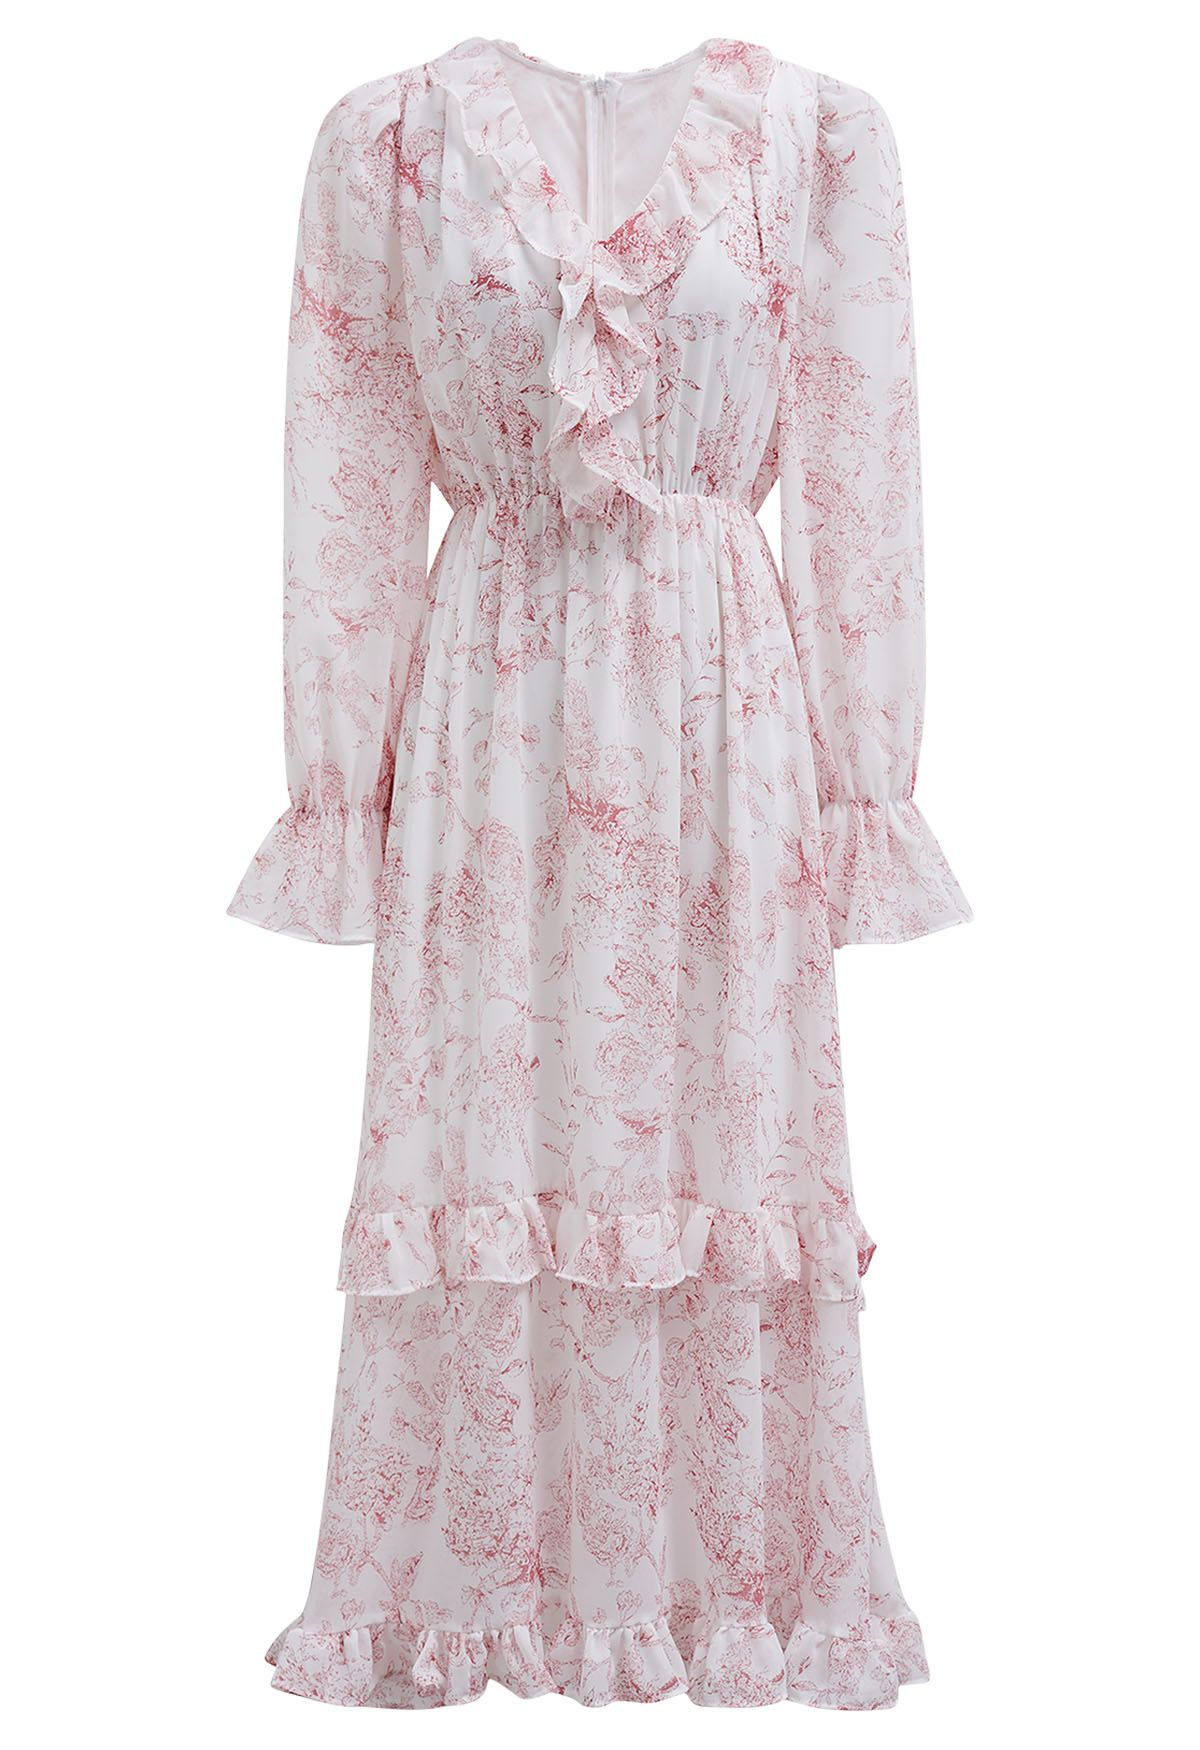 Spring Delight Ruffle Trimmed Chiffon Midi Dress in Pink